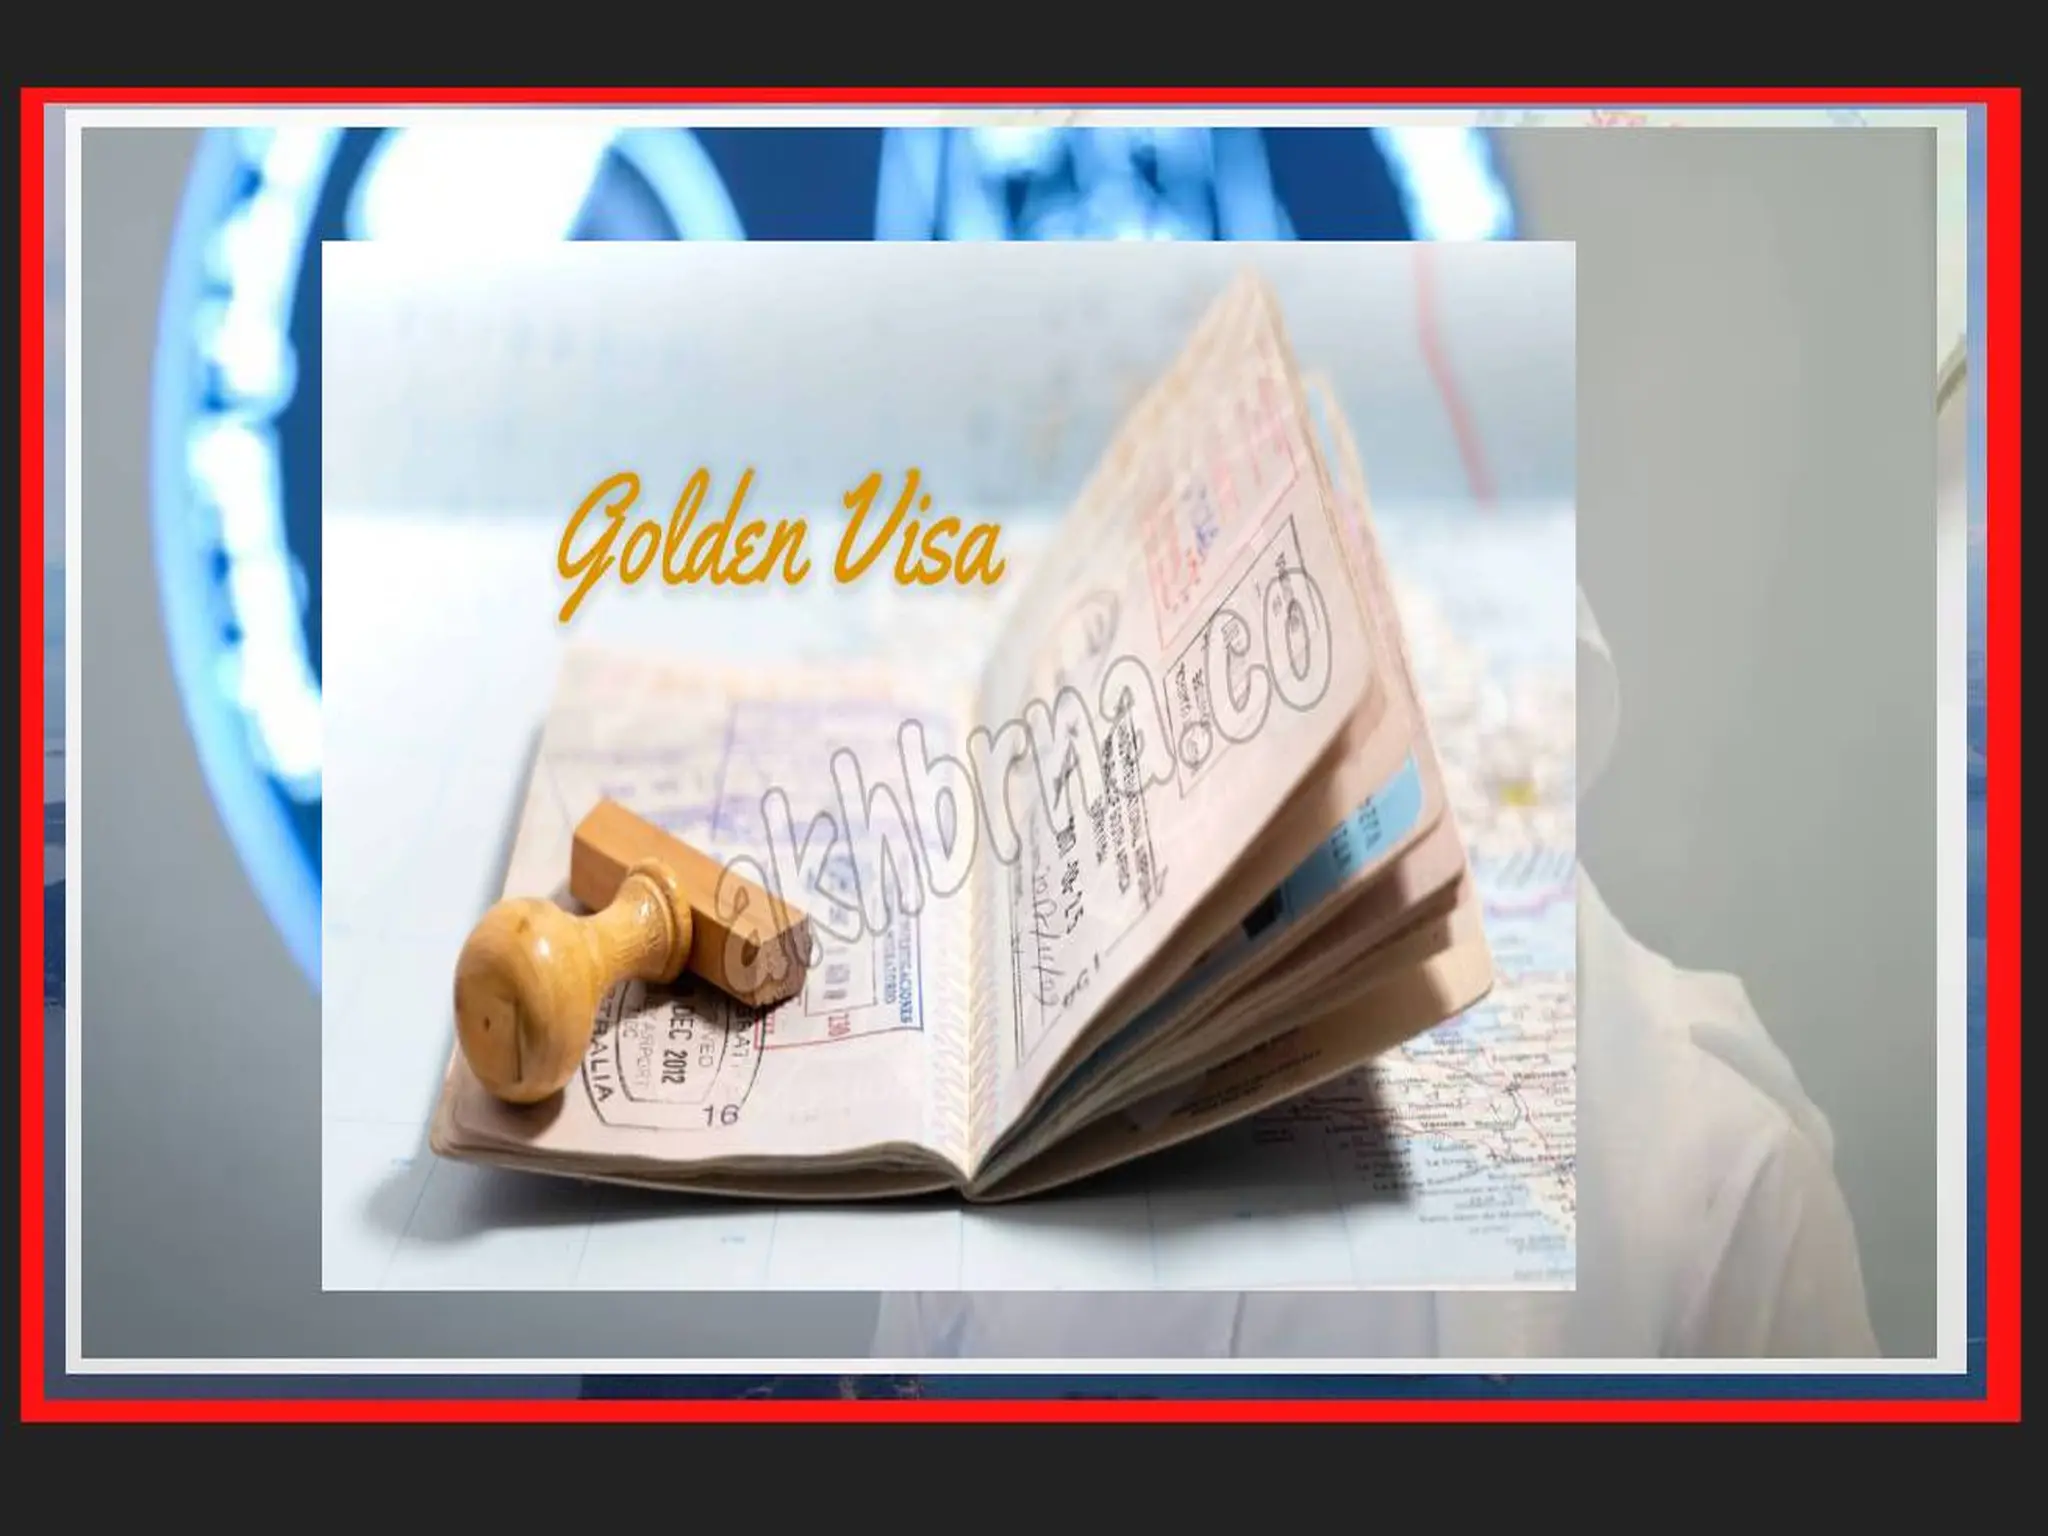 UAE announces an increase in applications for Golden Visa